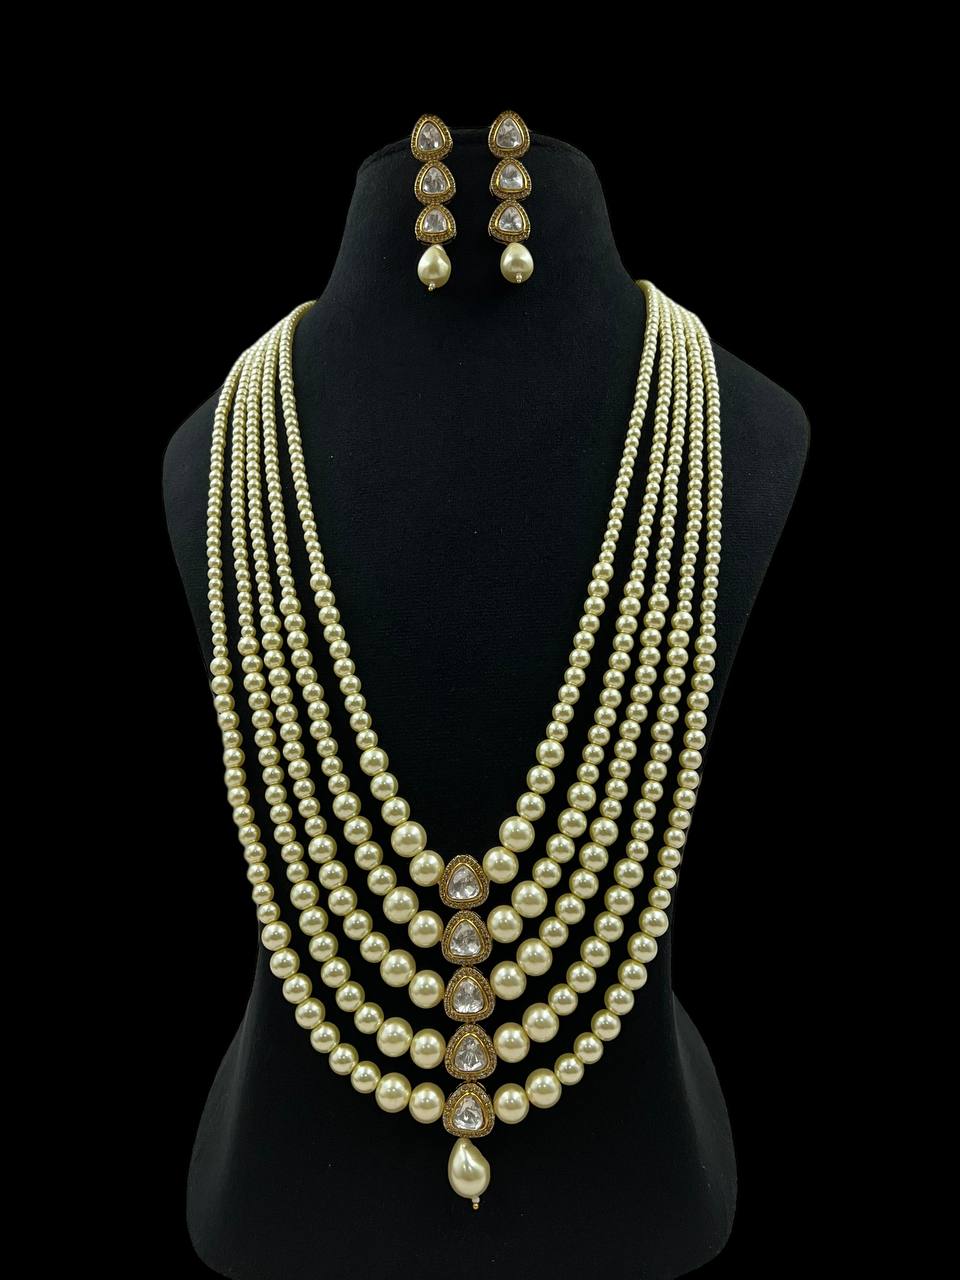 Long pearls necklace | Statement pearl’s necklace